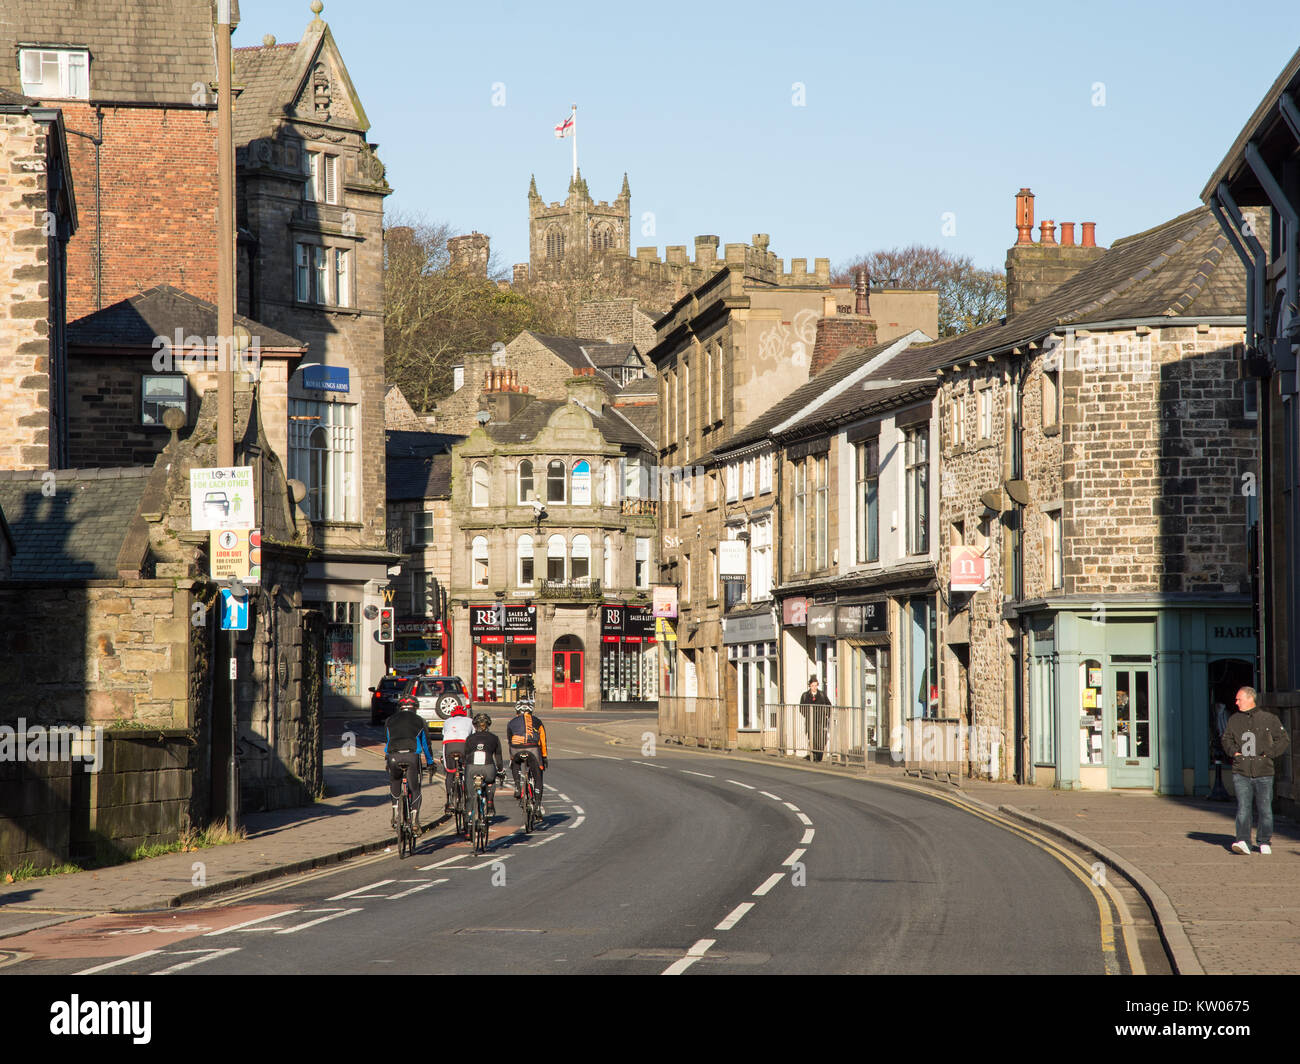 Lancaster, England, UK - November 12, 2017: A group of road cyclists ride past shops and houses on King Street in Lancaster, under the towers of Lanca Stock Photo